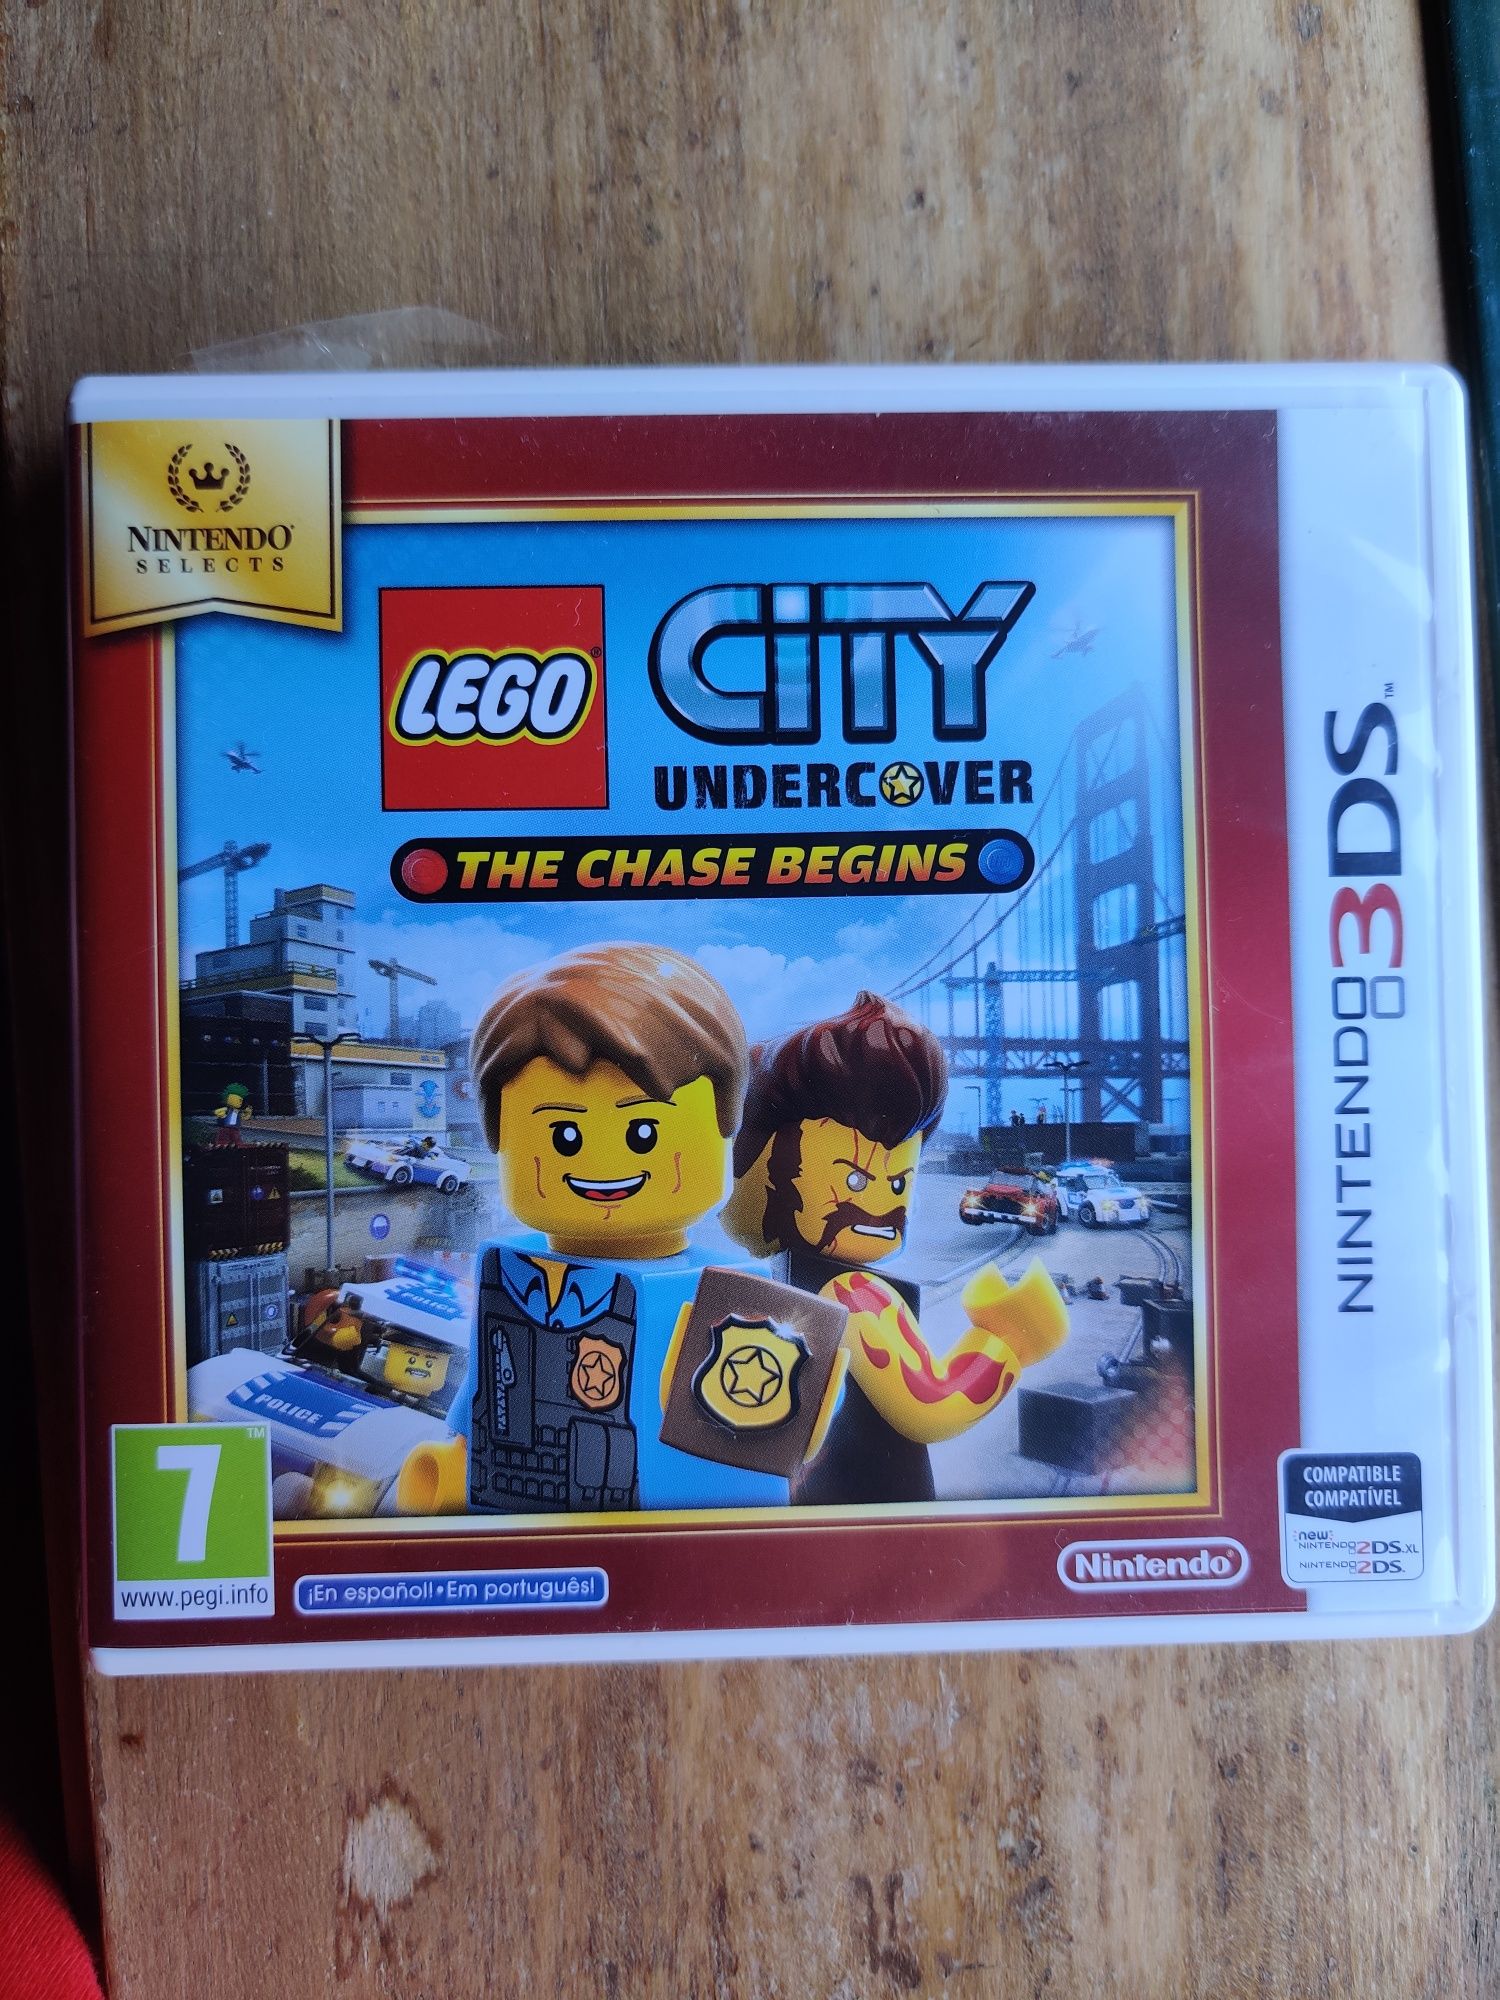 Lego City Undercover - The Chase Begins (Nintendo 3DS)